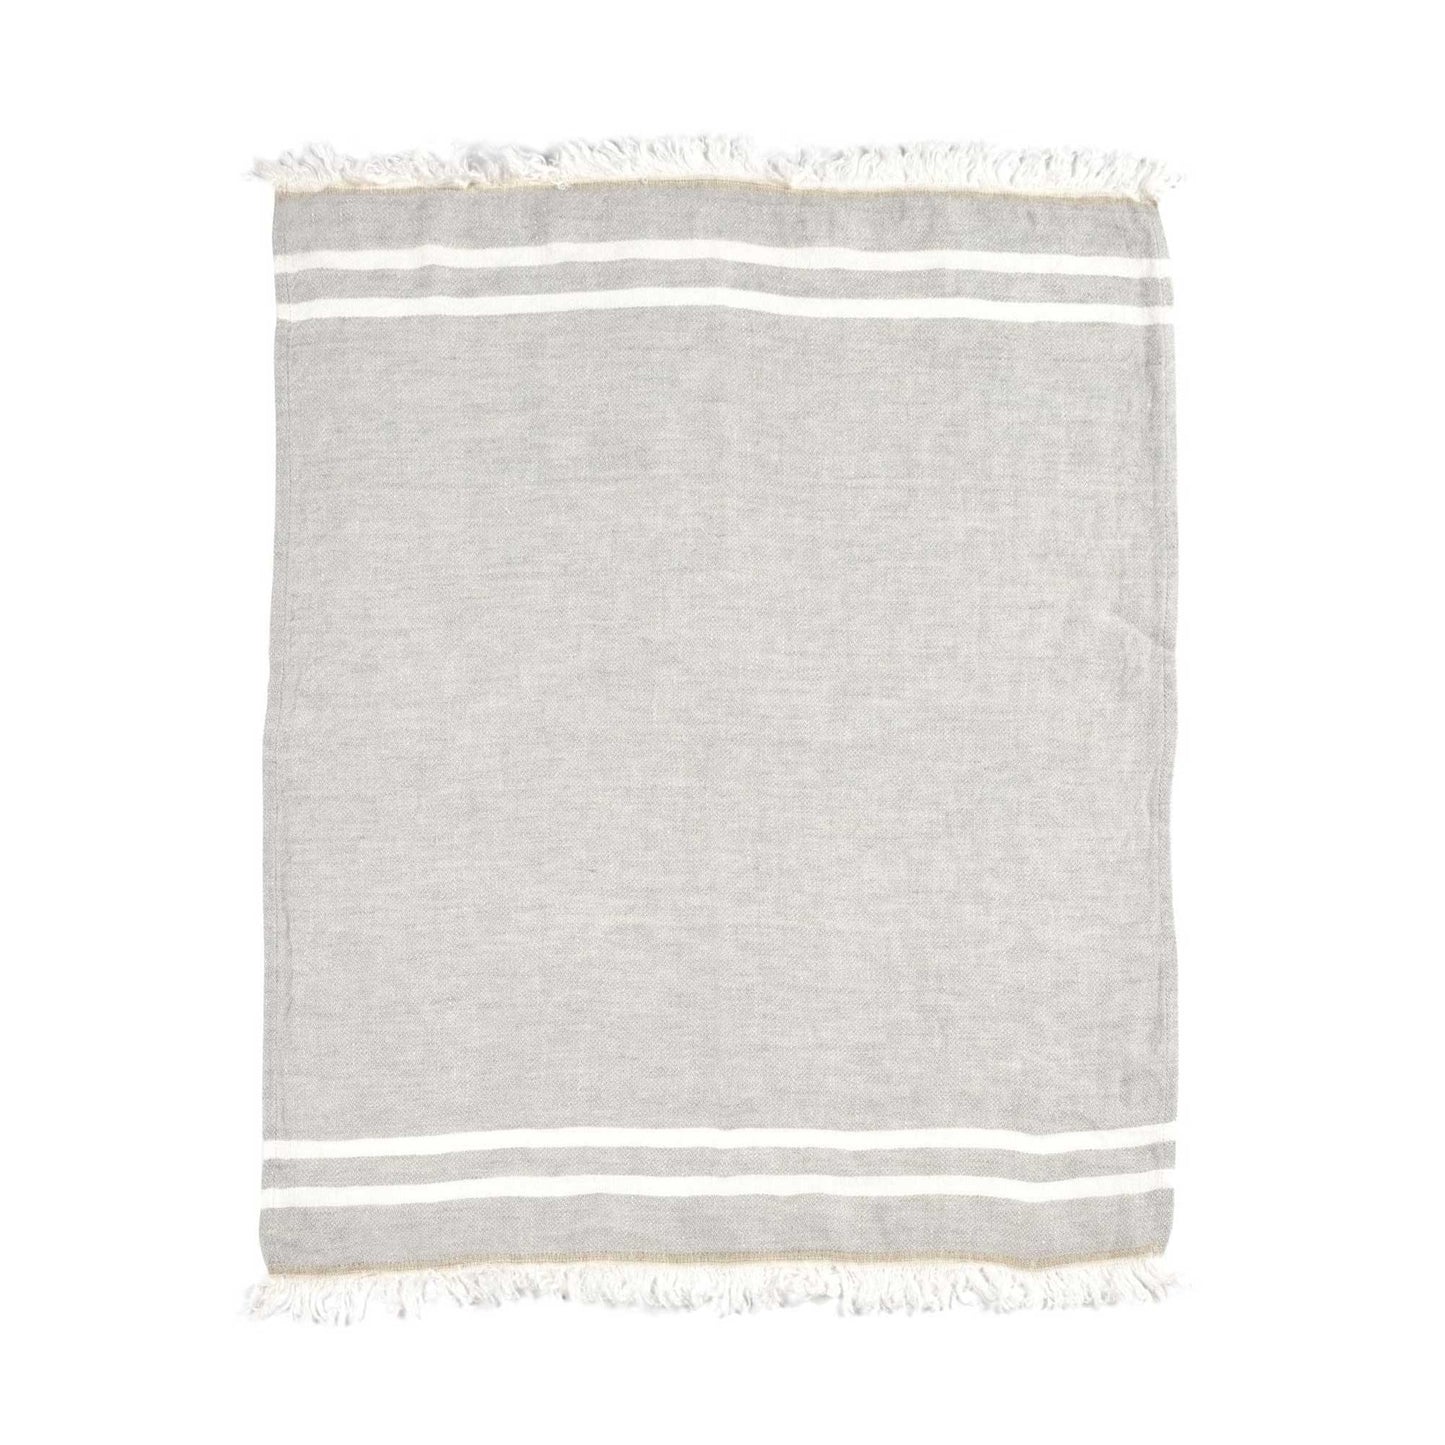 Belgian linen fouta throw blanket flat lay product shot in color Gray by Libeco for South Hous.